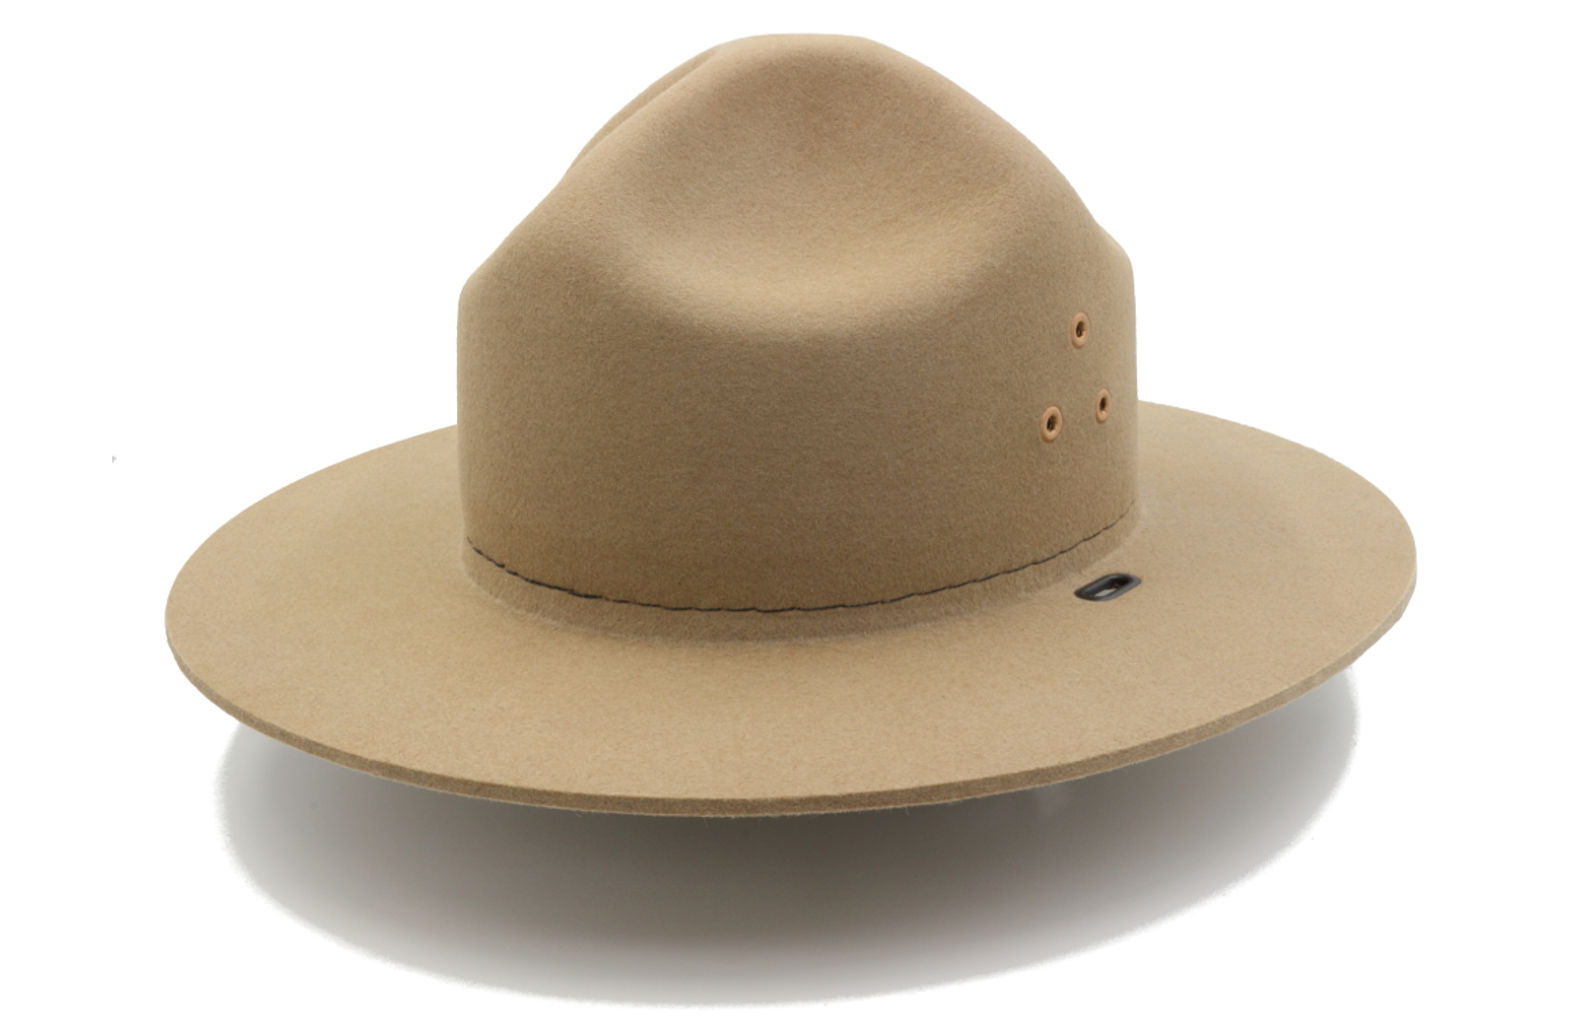 Buyer's Guide - Stratton Hats